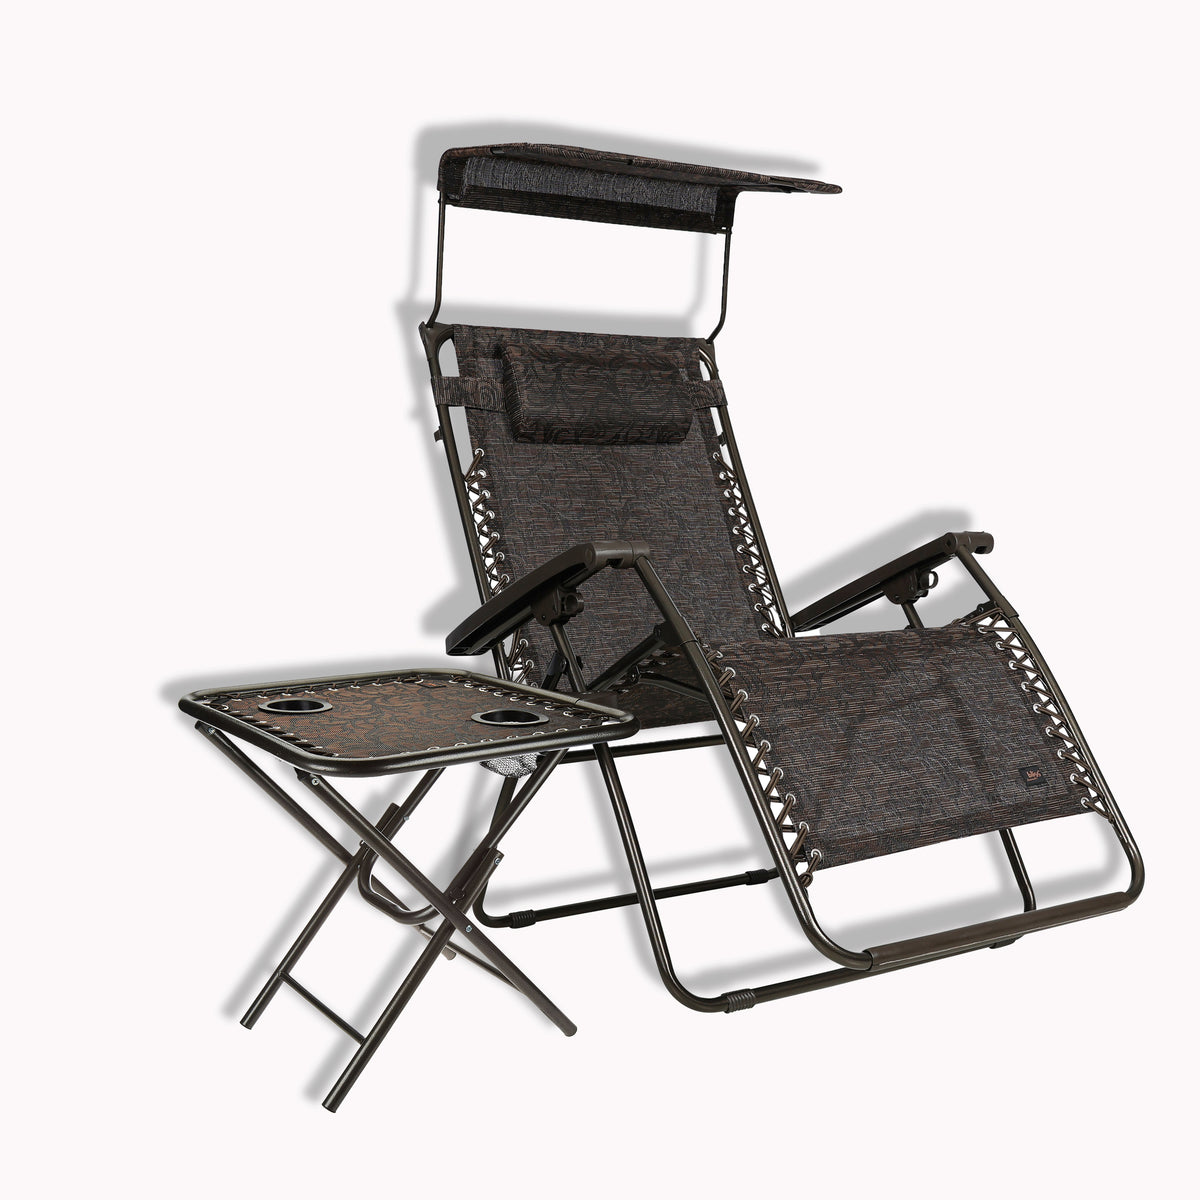 Bliss Hammocks 30-inch Wide XL Brown Jacquard Zero Gravity Chair and a matching side table.